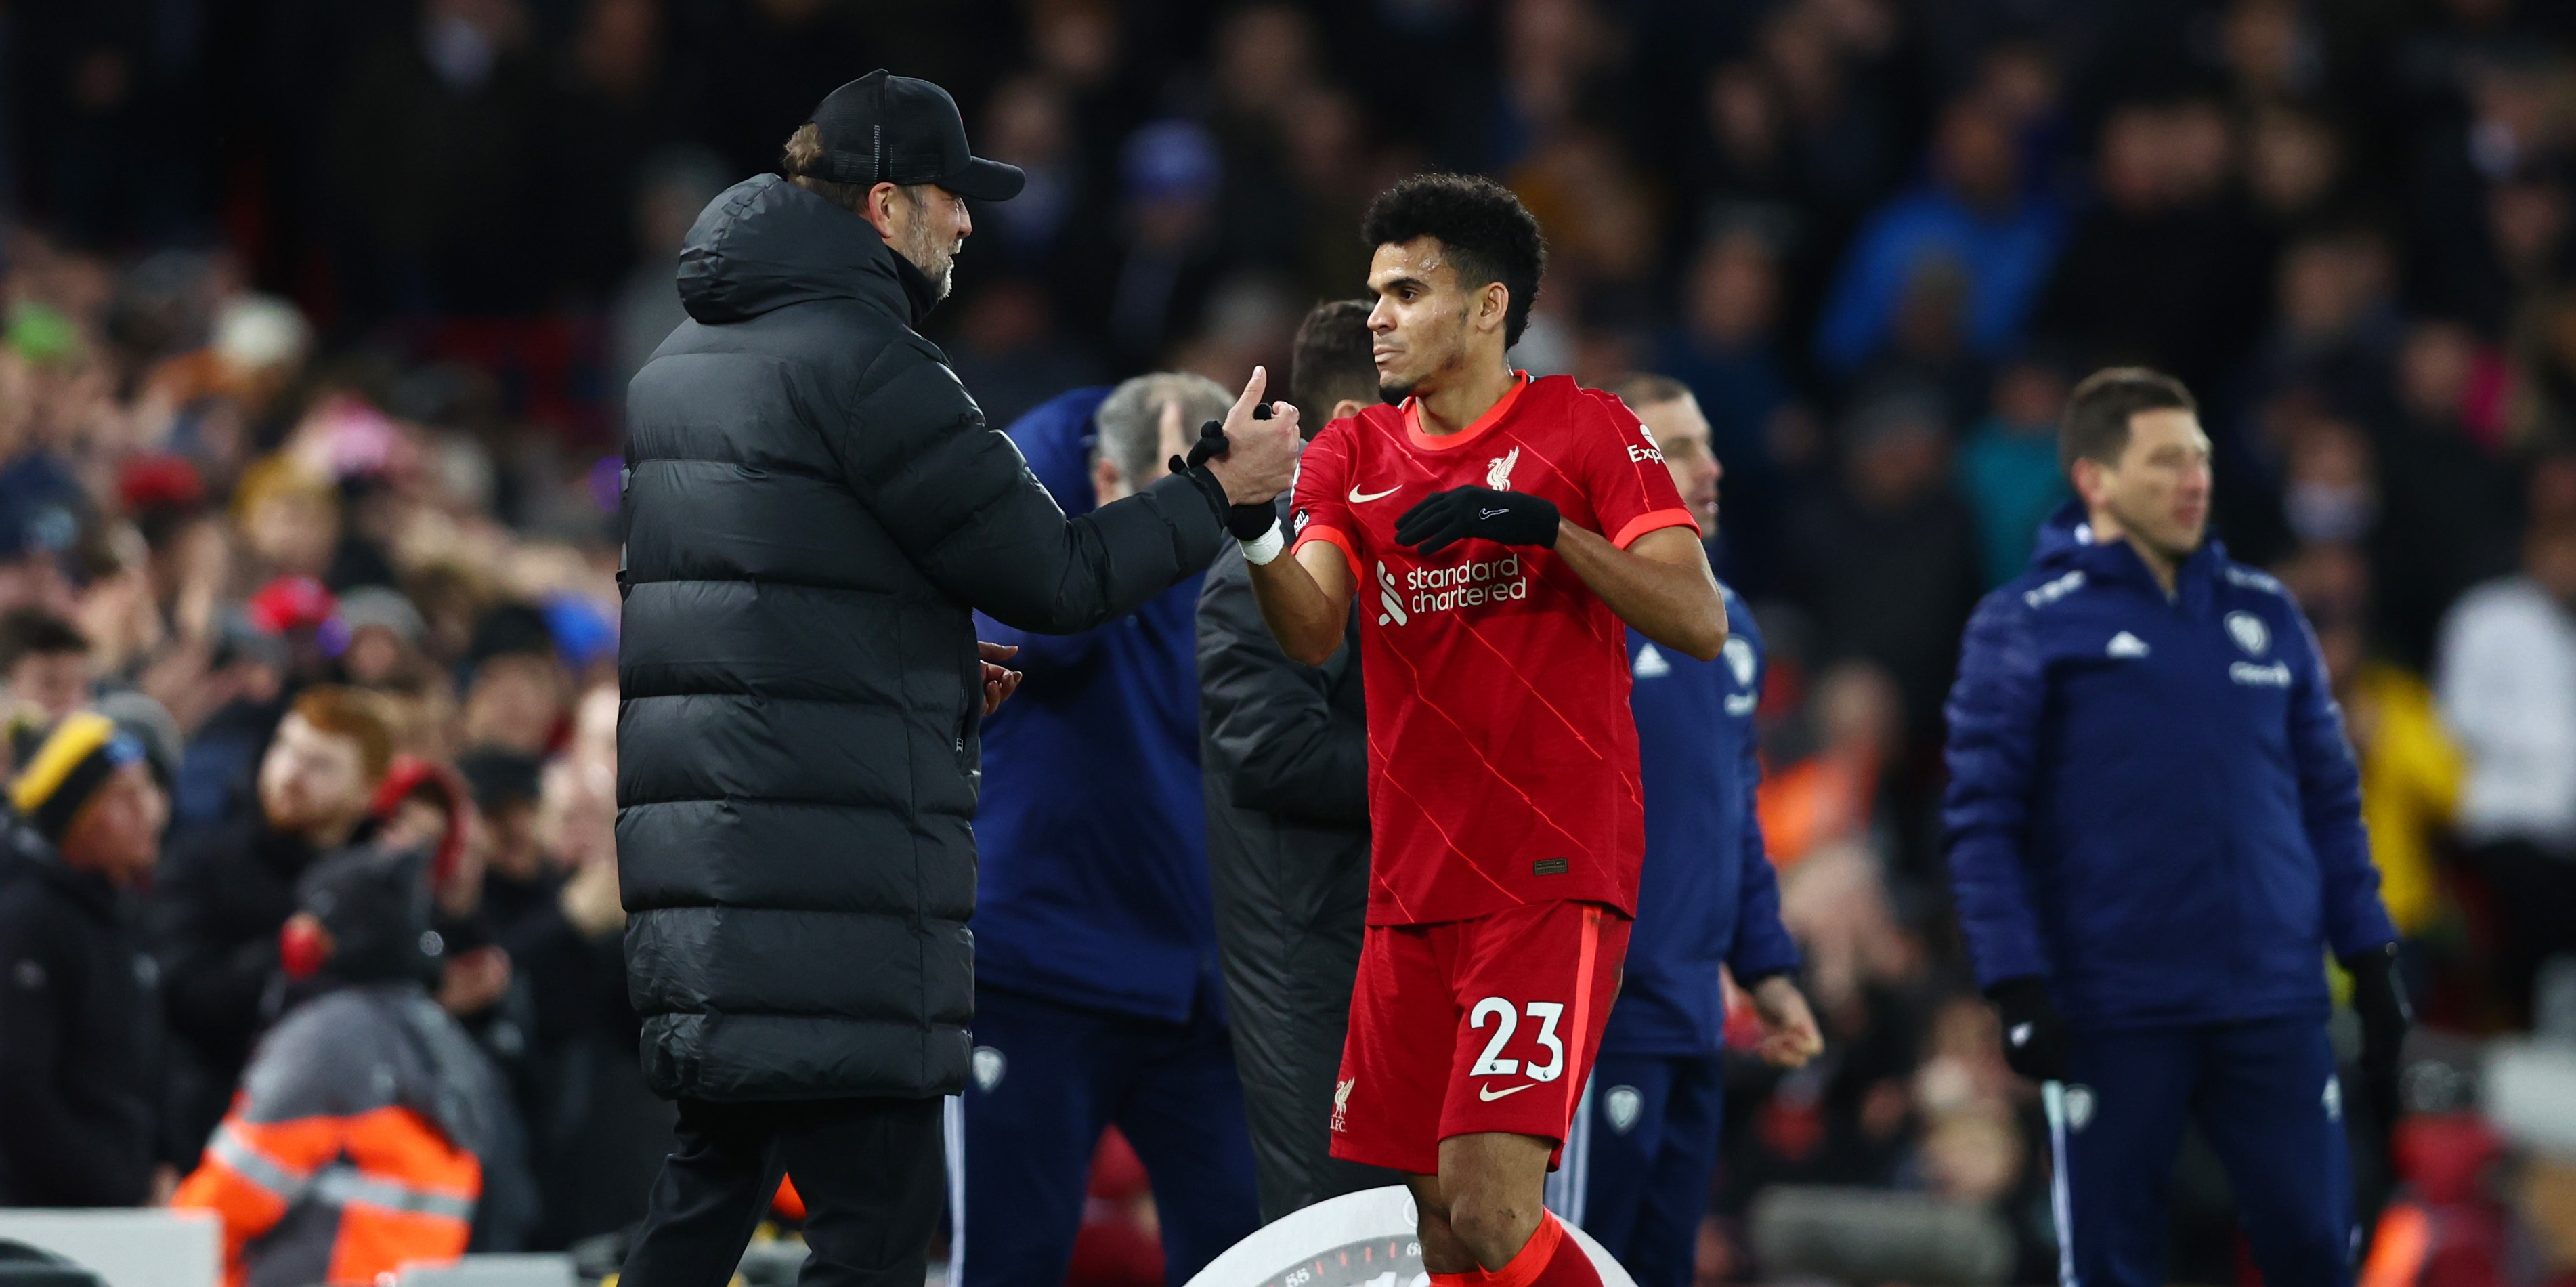 Jurgen Klopp’s stellar advice to Luis Diaz pays dividends as Liverpool star shares details of private chat